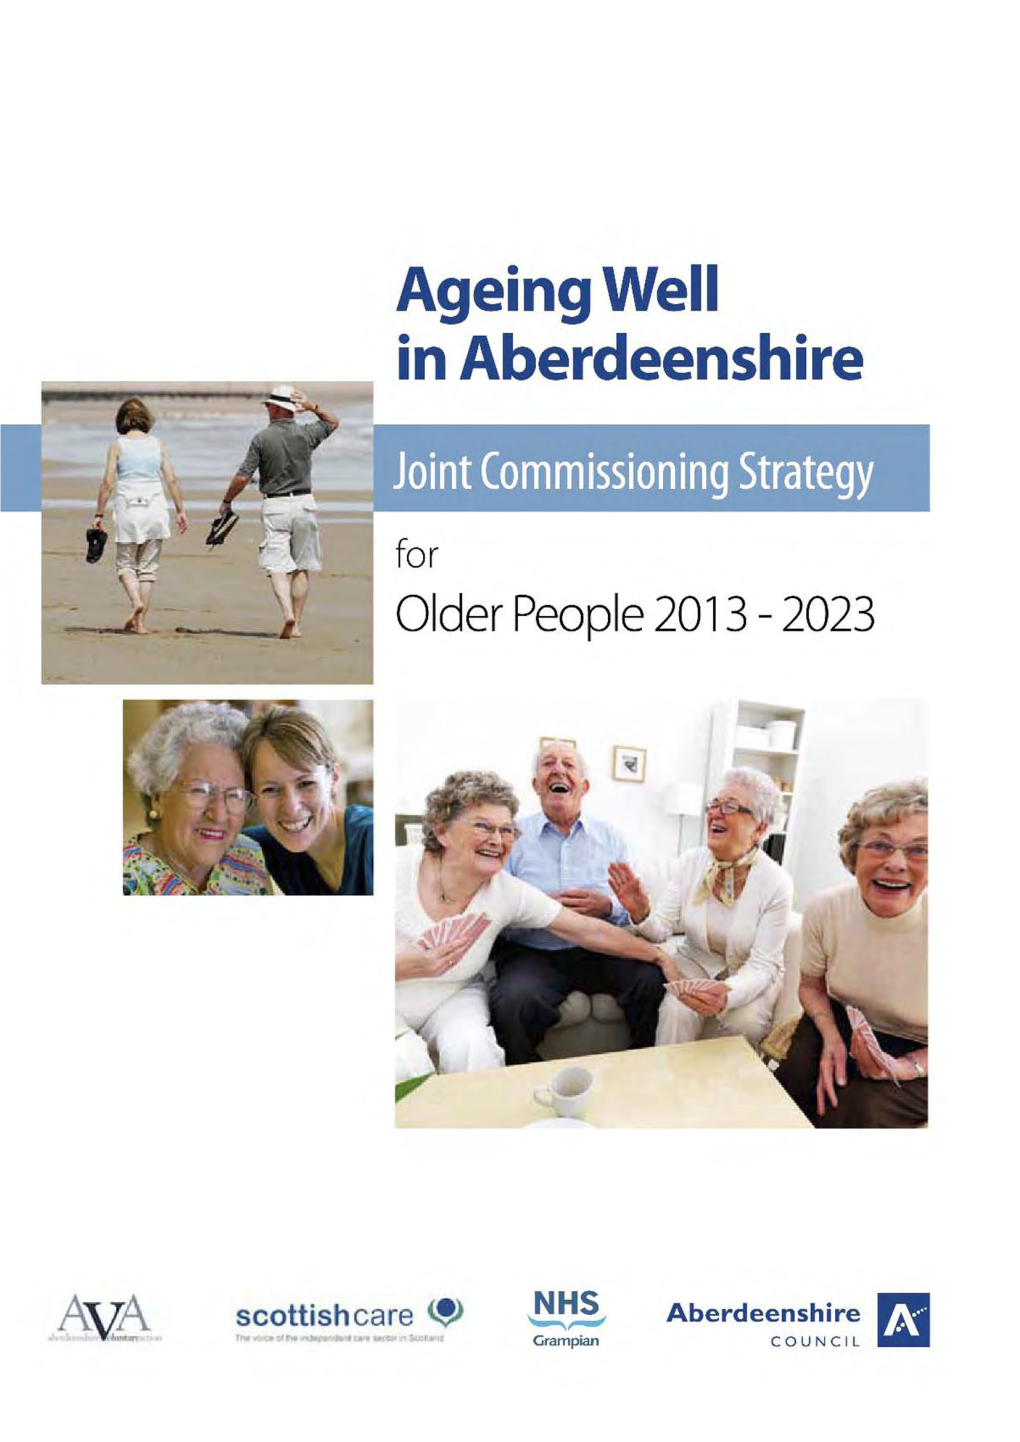 Joint Commissioning Strategy for Older People 'Ageing Well In